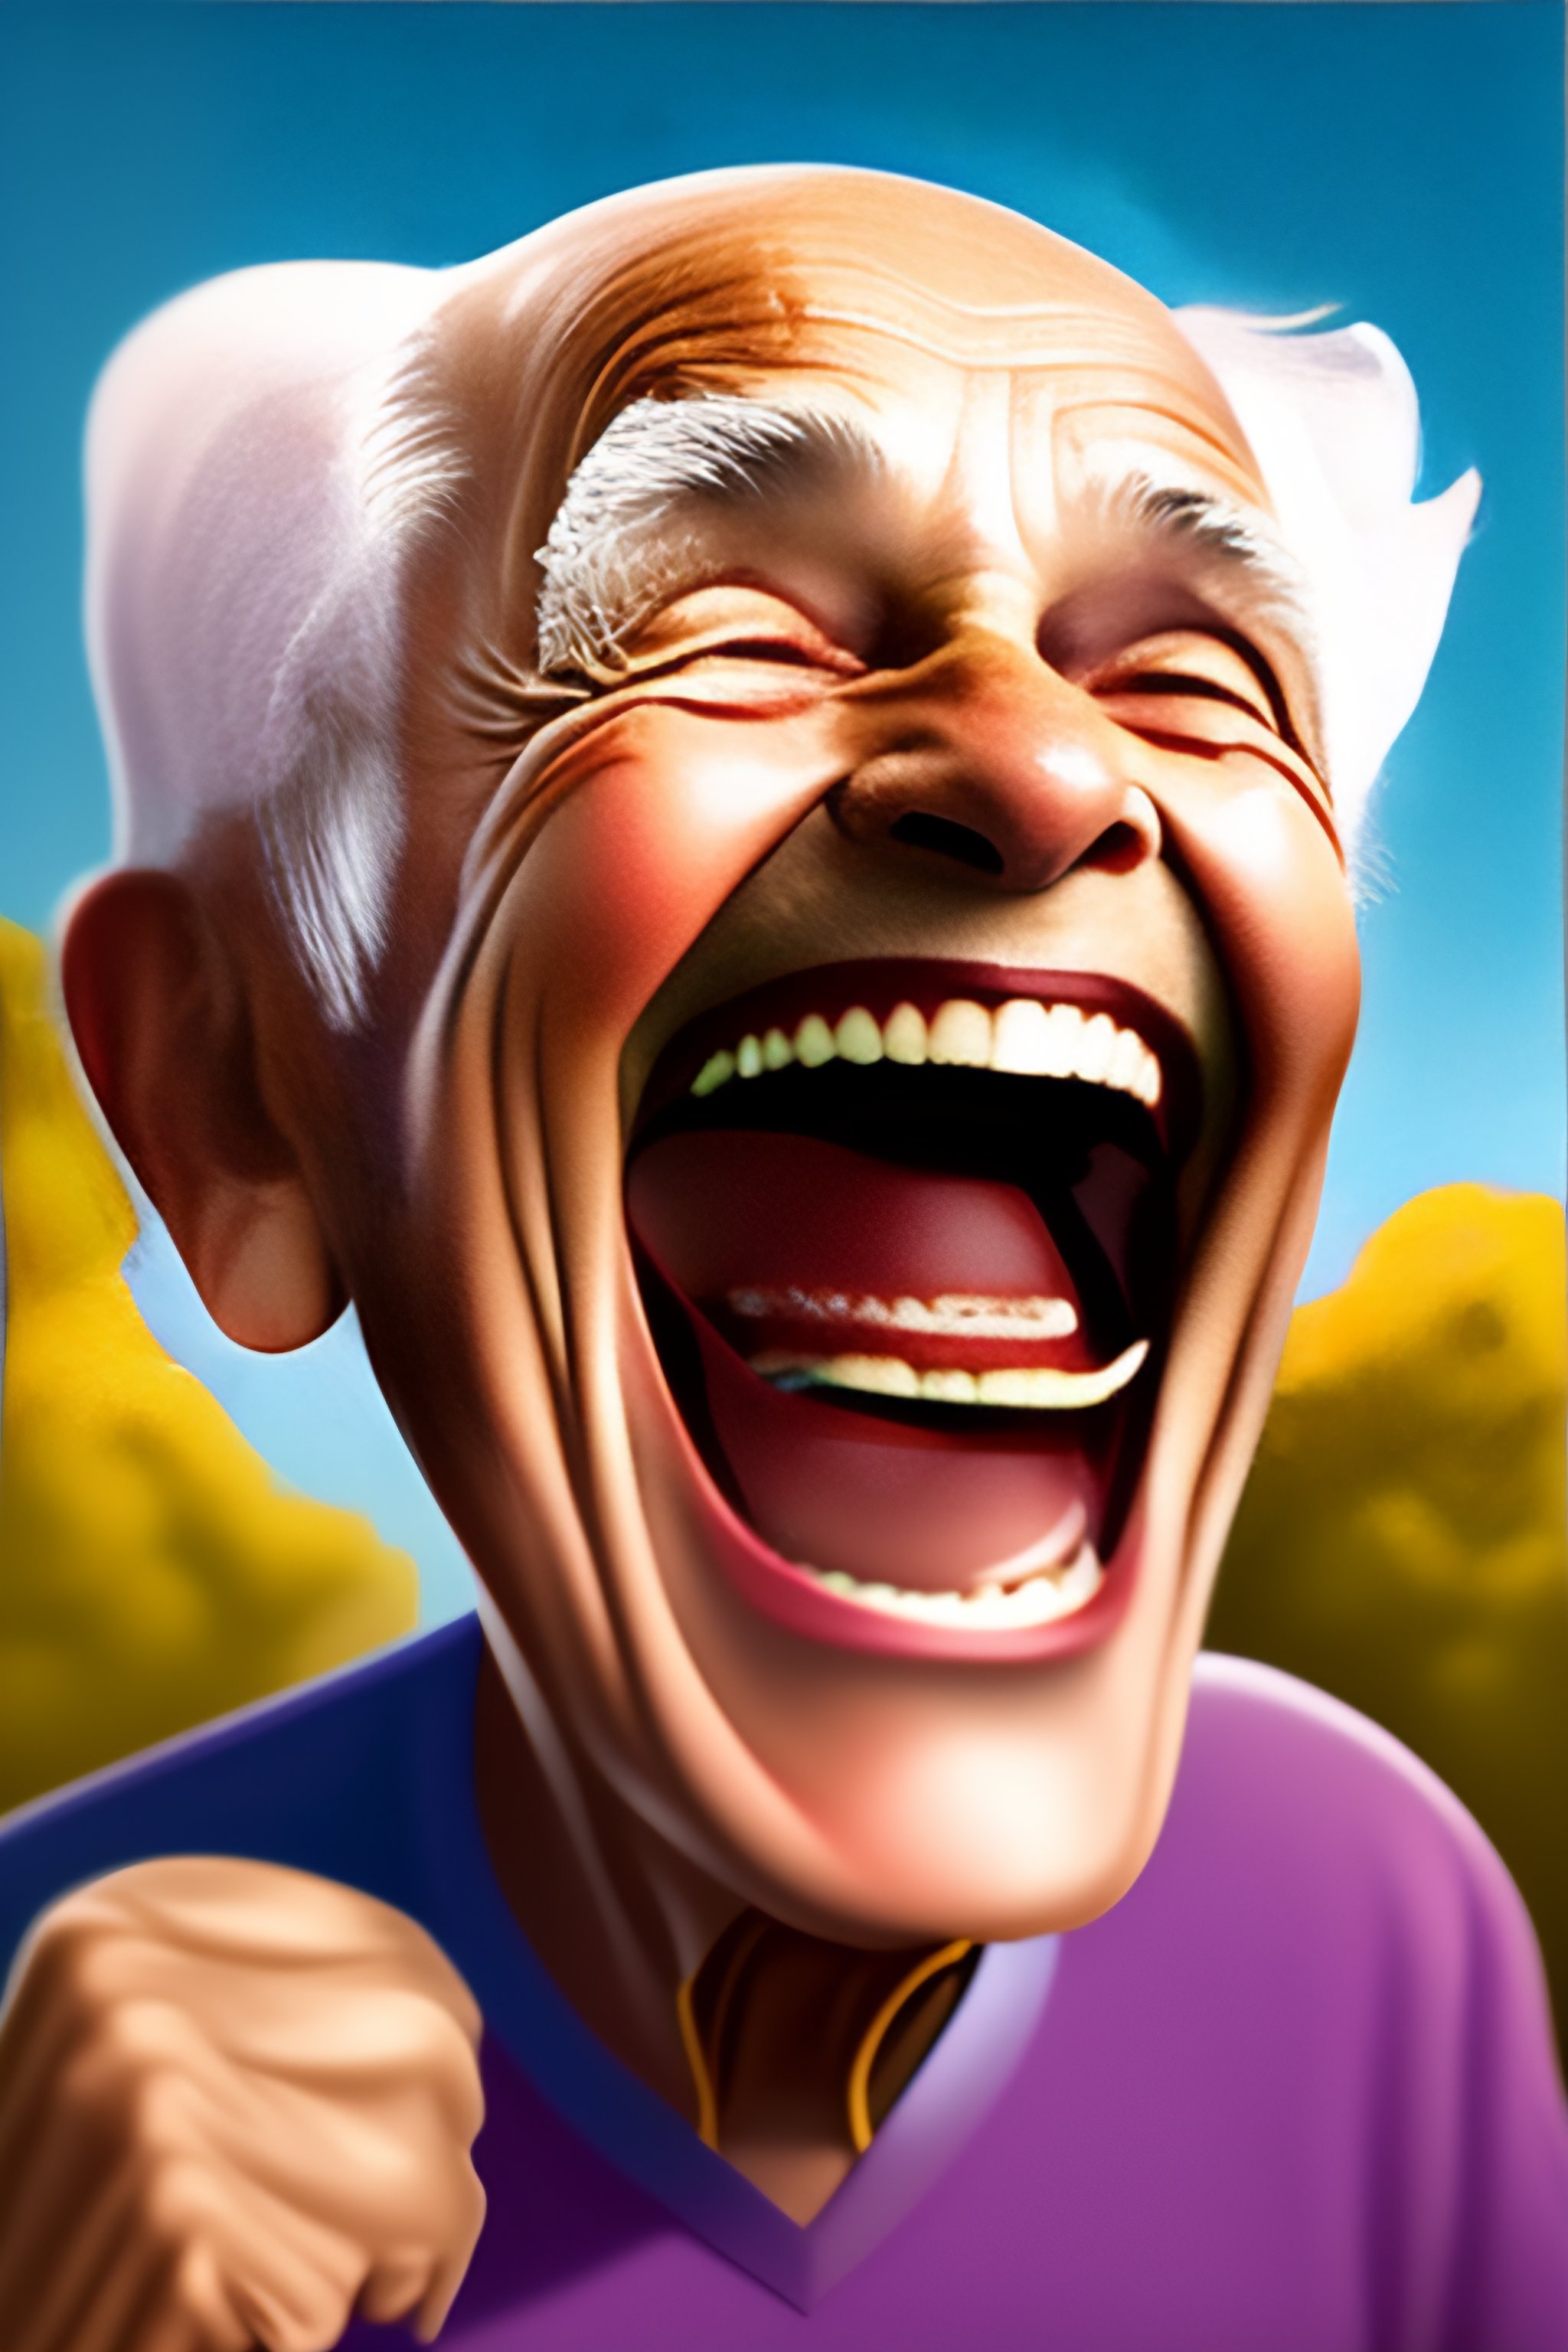 animated laughing images